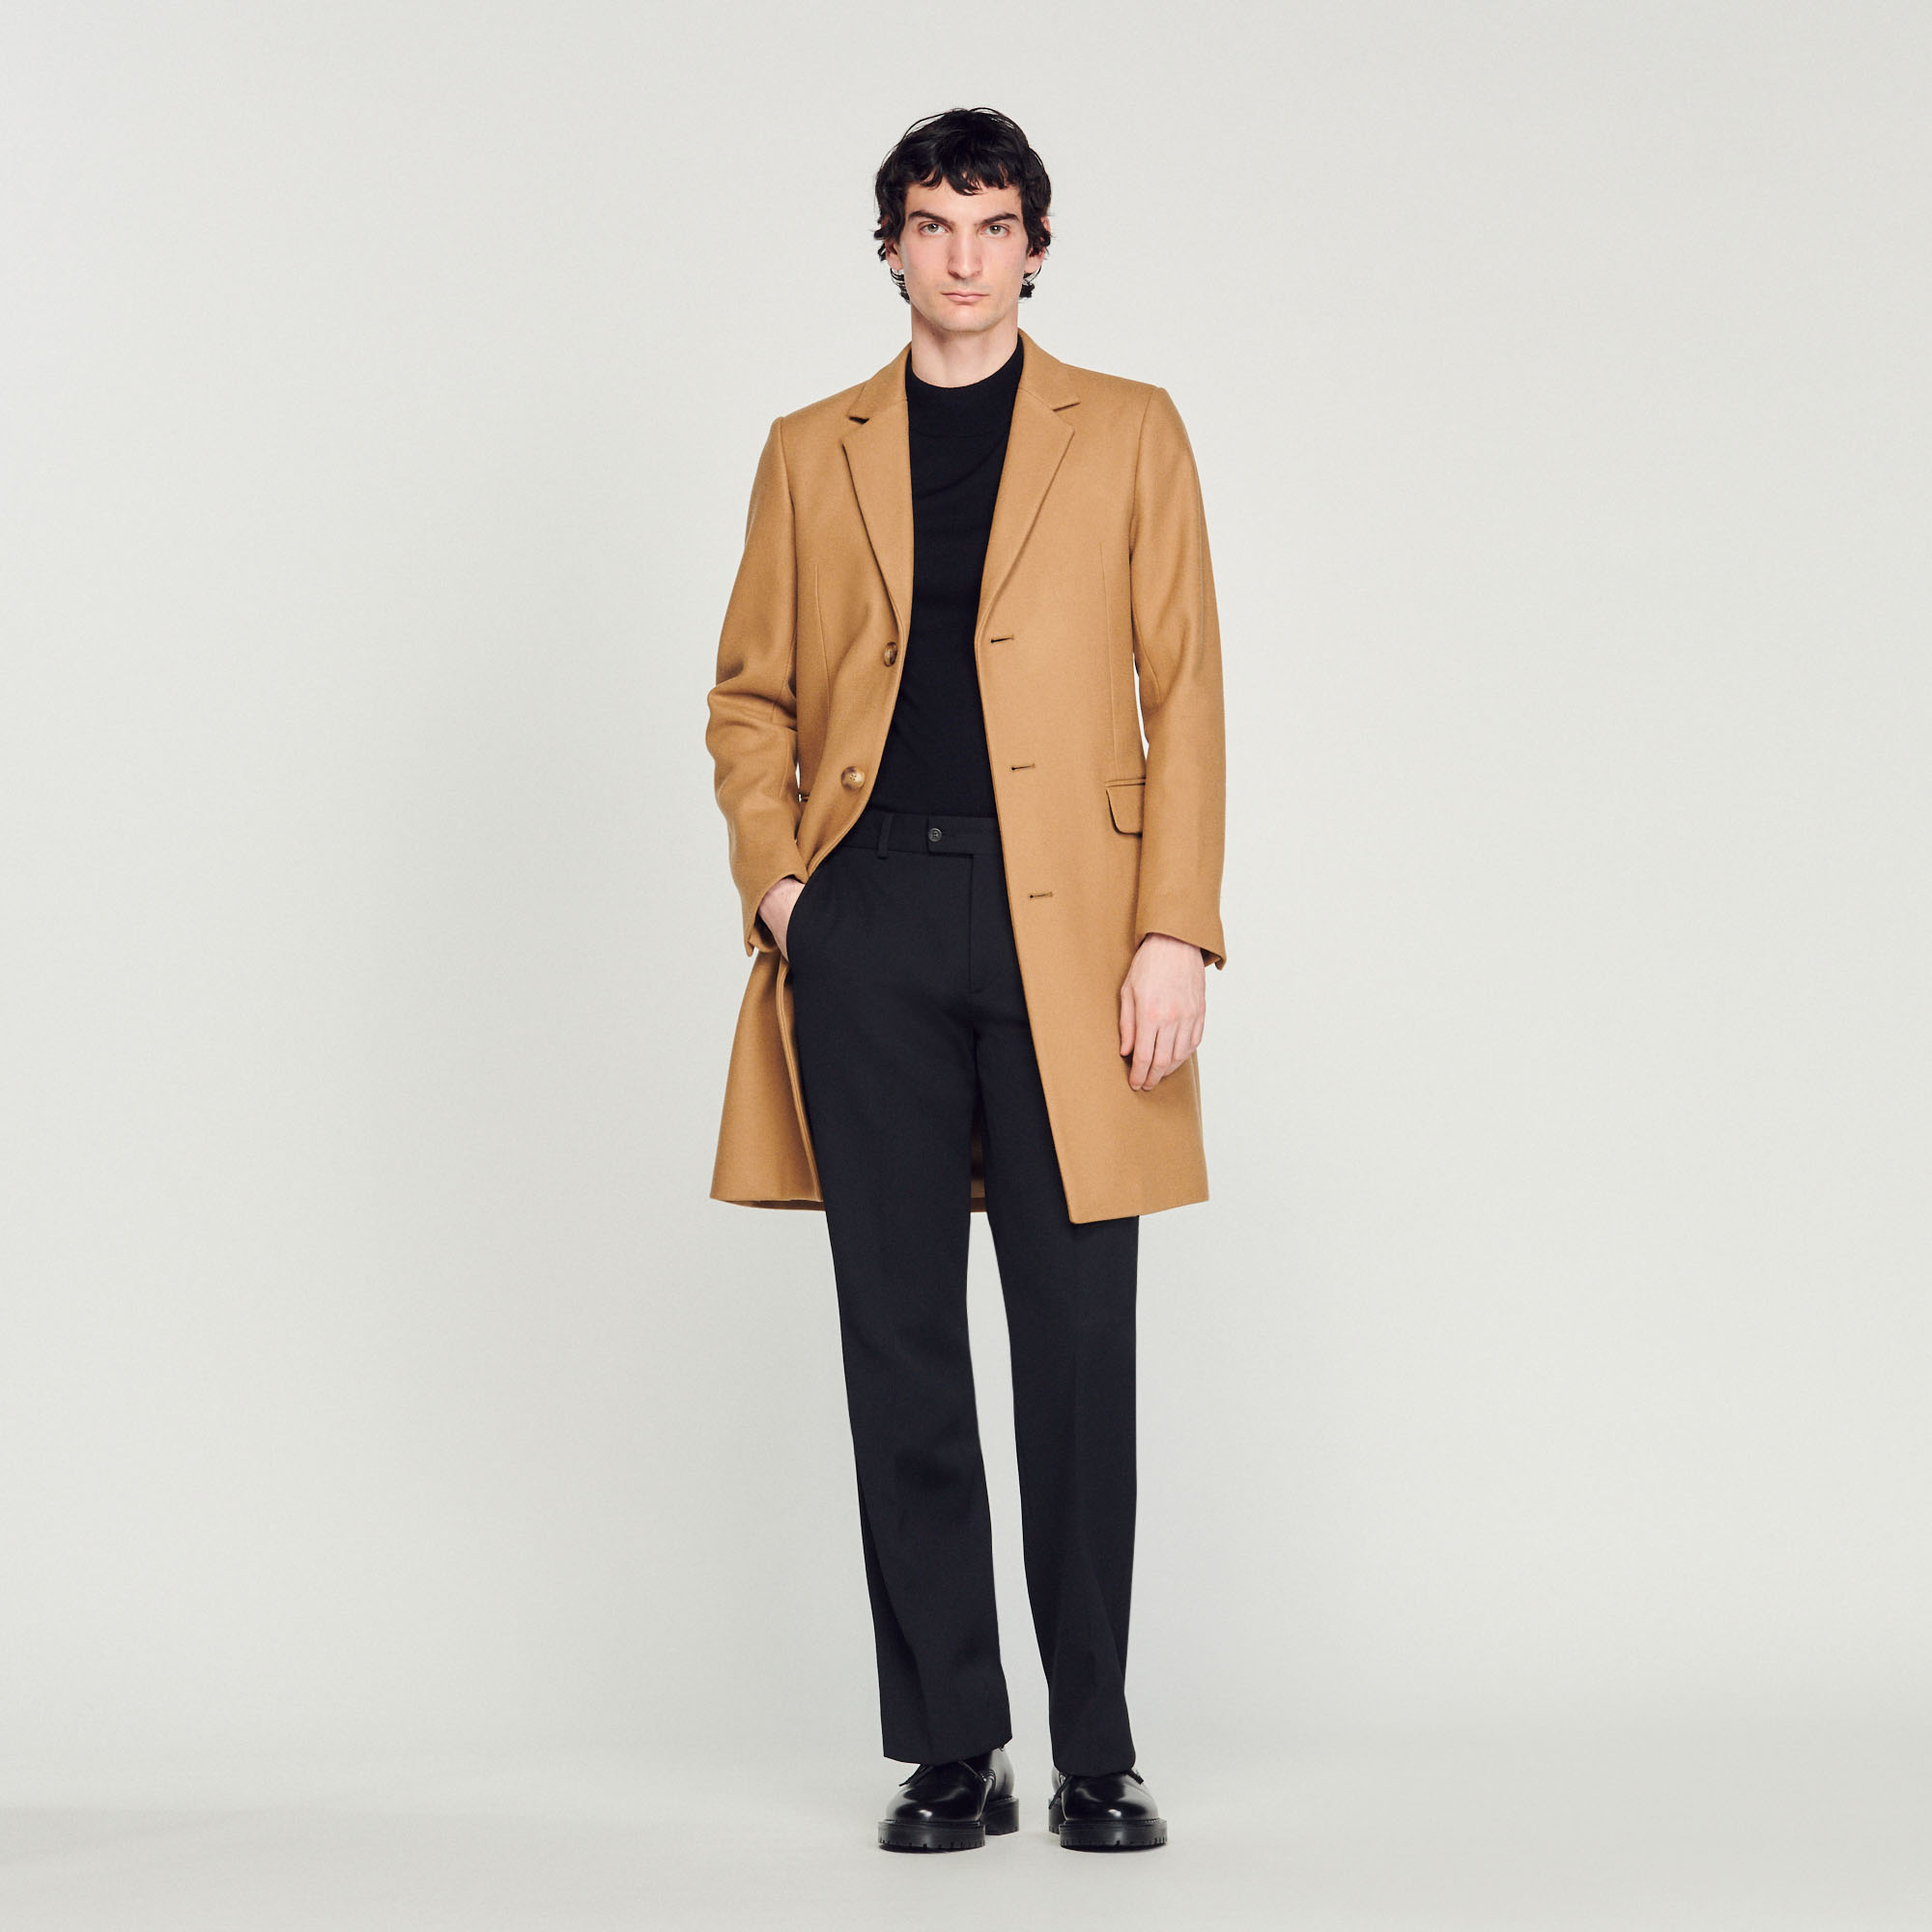 Sandro wool Sandro men's coat â€¢ Wool coat â€¢ Tailored collar â€¢ Fastened with three buttons â€¢ Side pockets with flap â€¢ Internal pockets â€¢ Vent at the back â€¢ Fitted cut Model is wearing a size S and is 6'1''